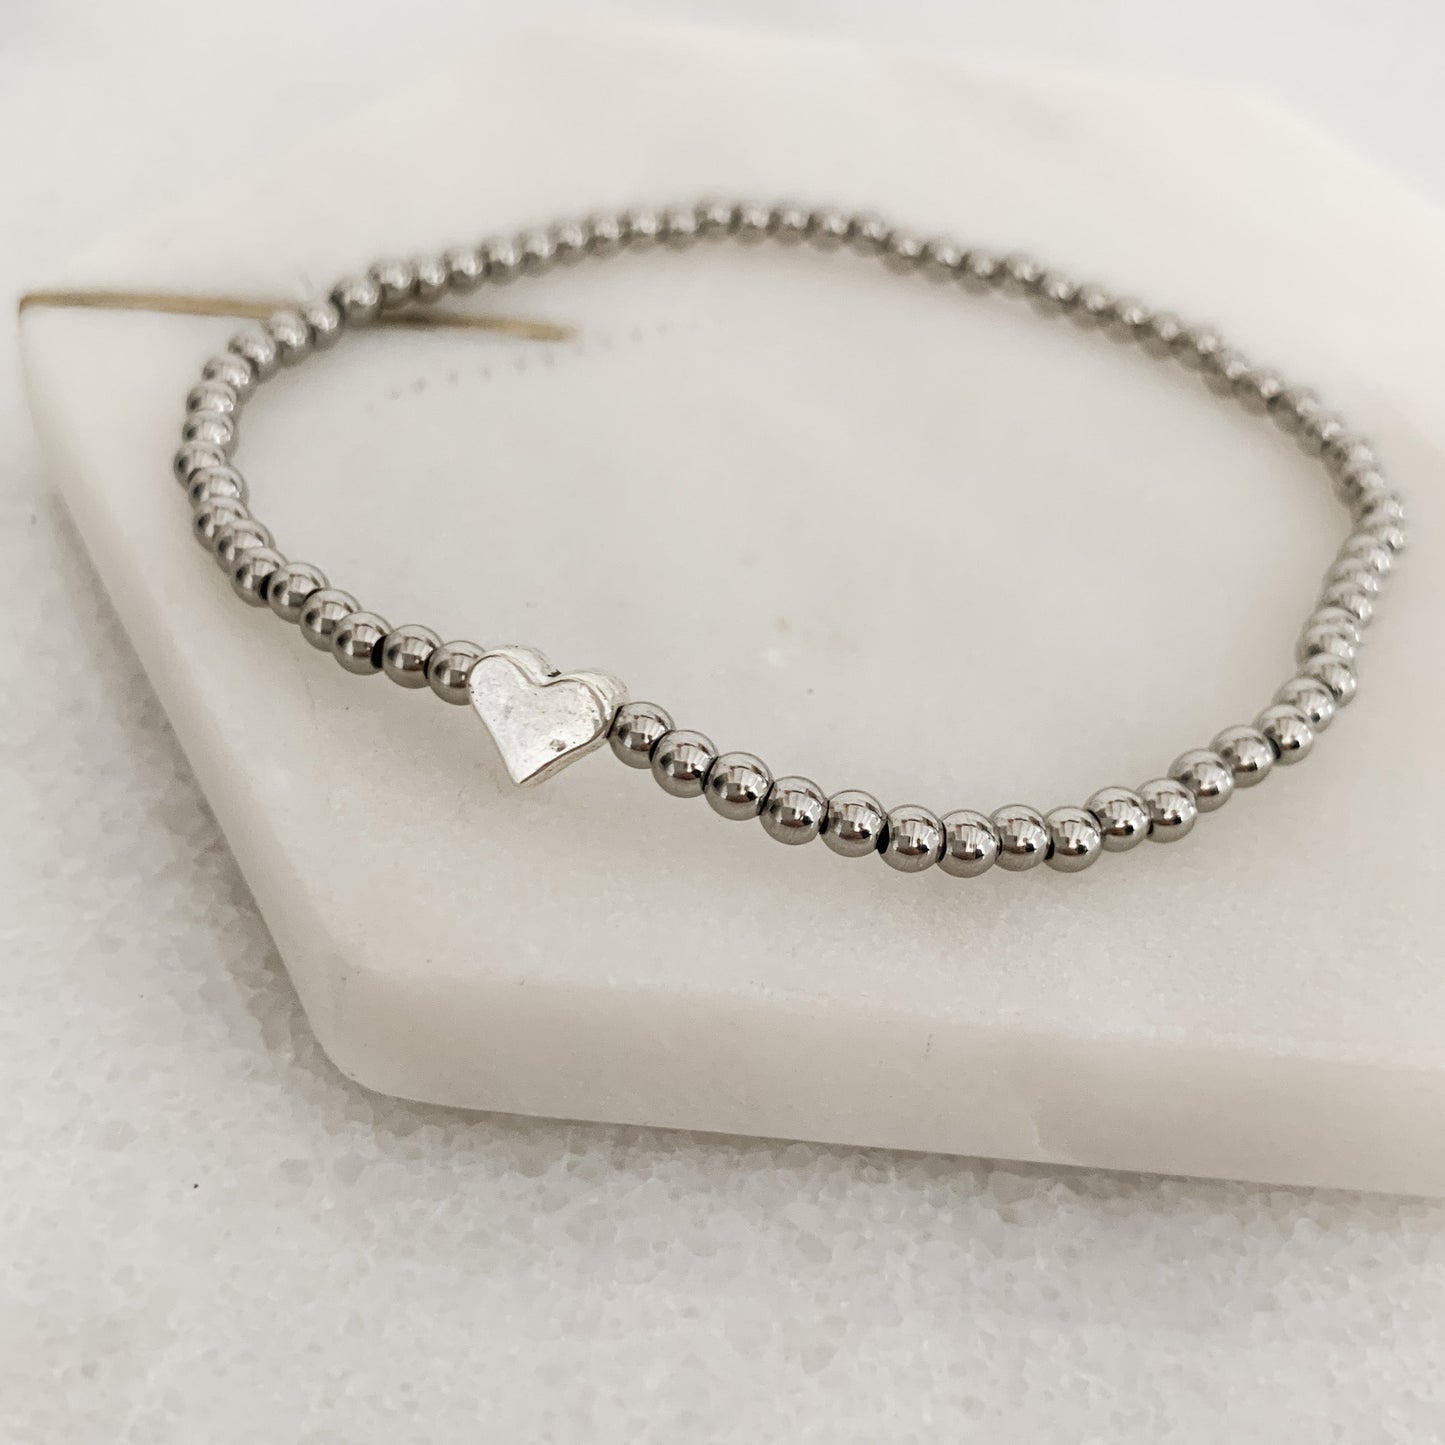 Sisters Share Memories Laughter and Love - Heart Stretch Bracelet